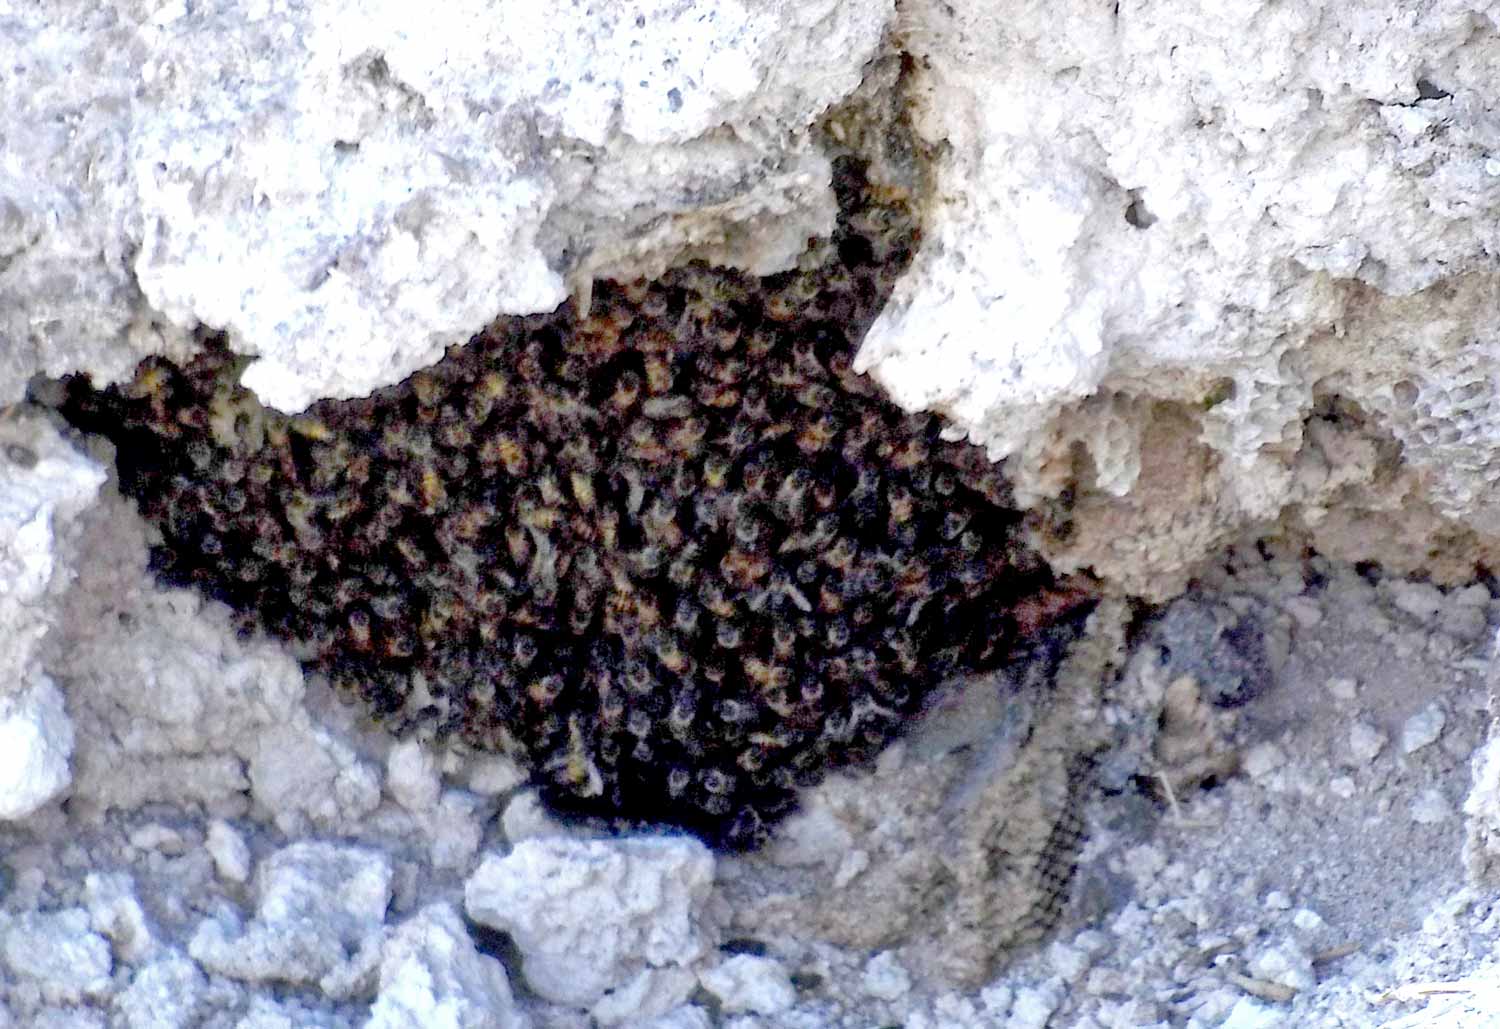 Bees in a hive in a rock formation along the trail